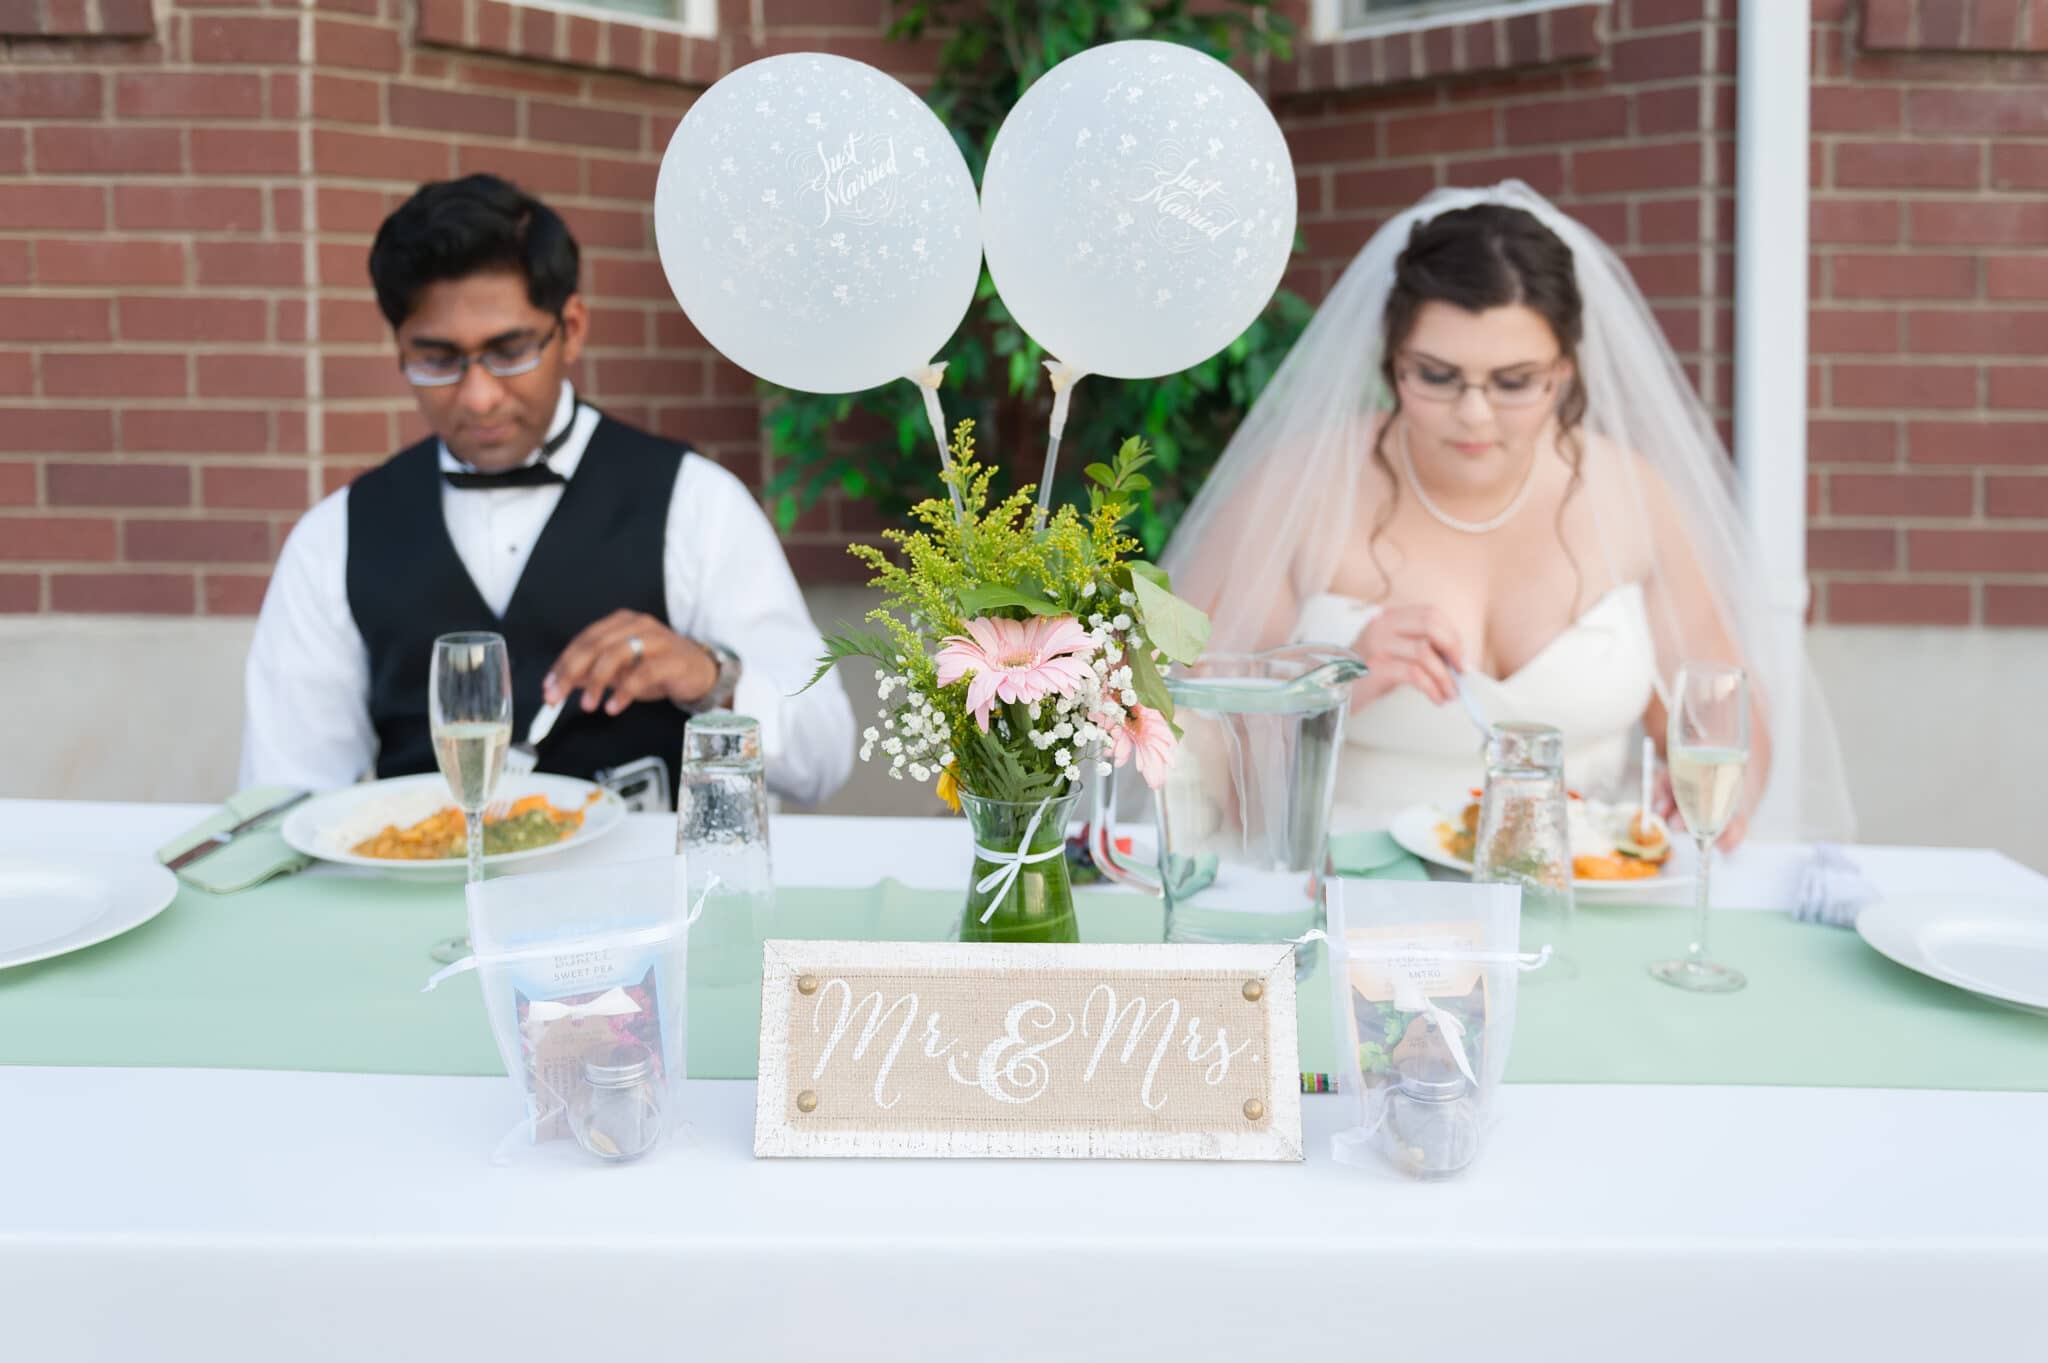 At the head table labeled Mr & Mrs, the bride and groom enjoy their meal together.